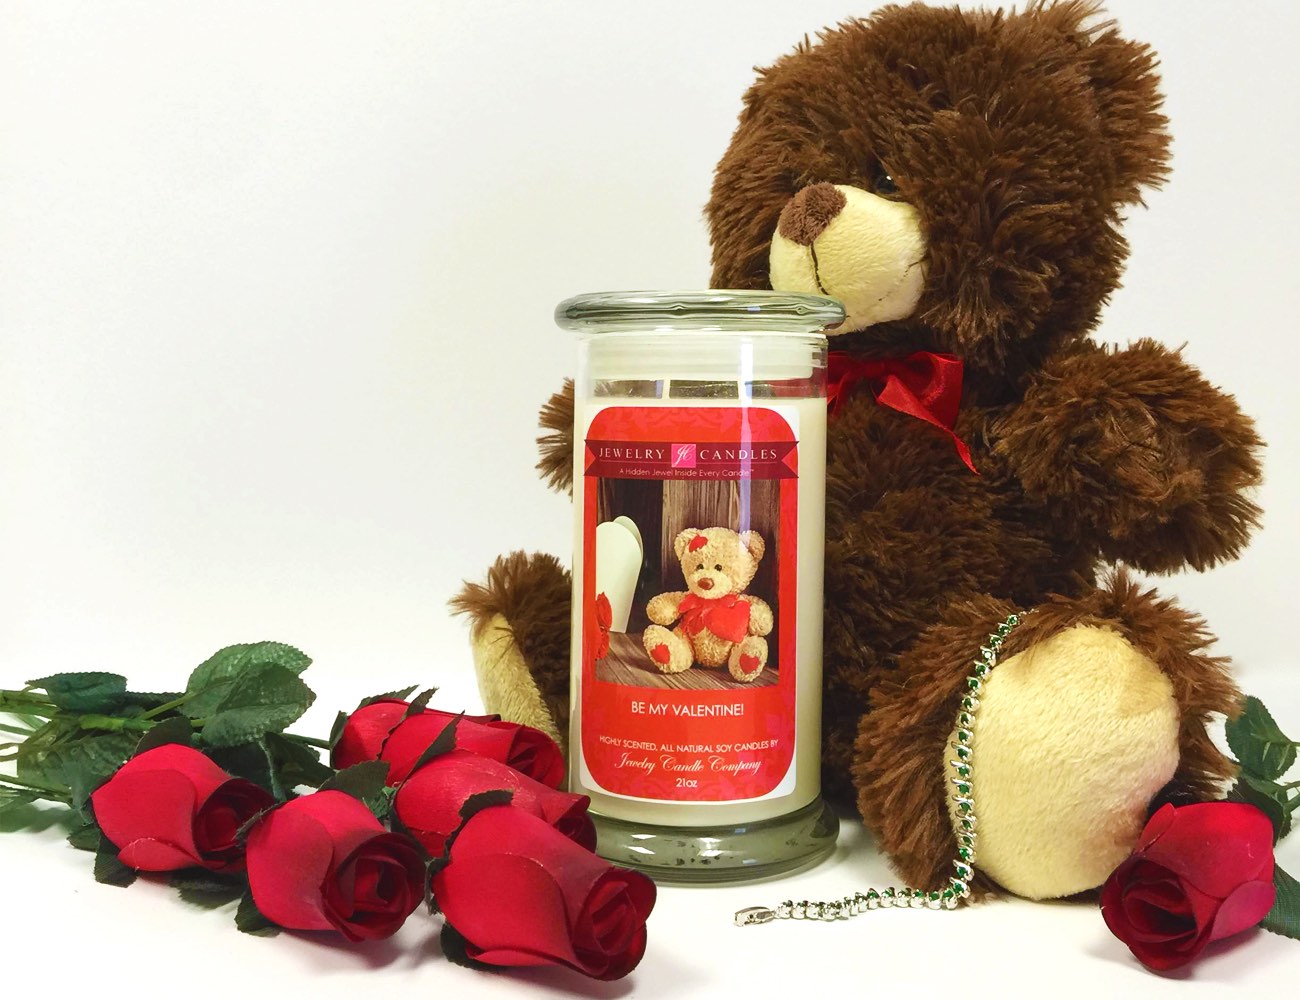 Be My Valentine Jewelry Candle – A Hidden Jewel Inside Every Candle!